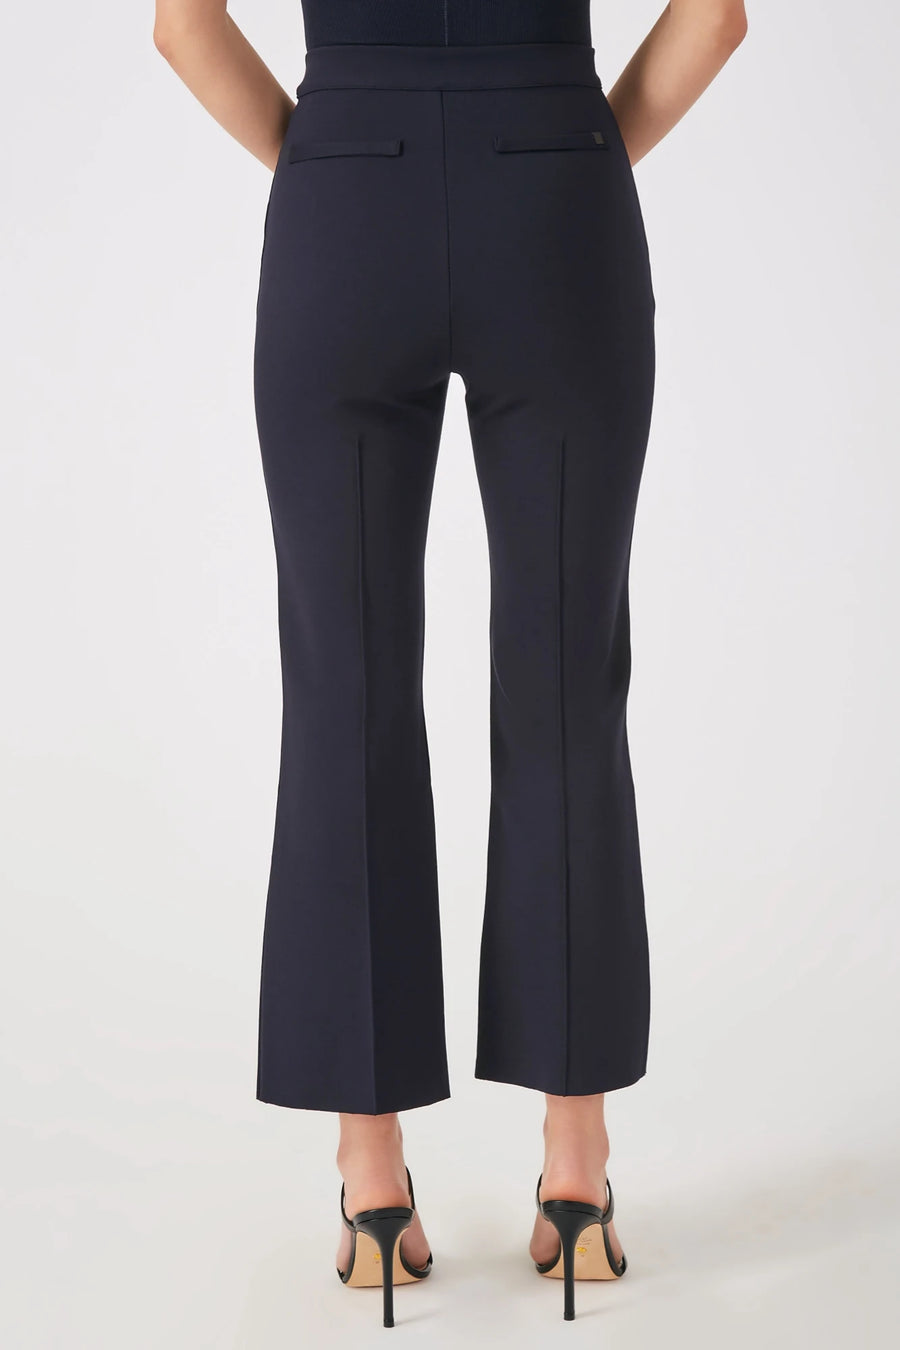 The Porterfield crop nip tuck flare pant in navy by Greyven